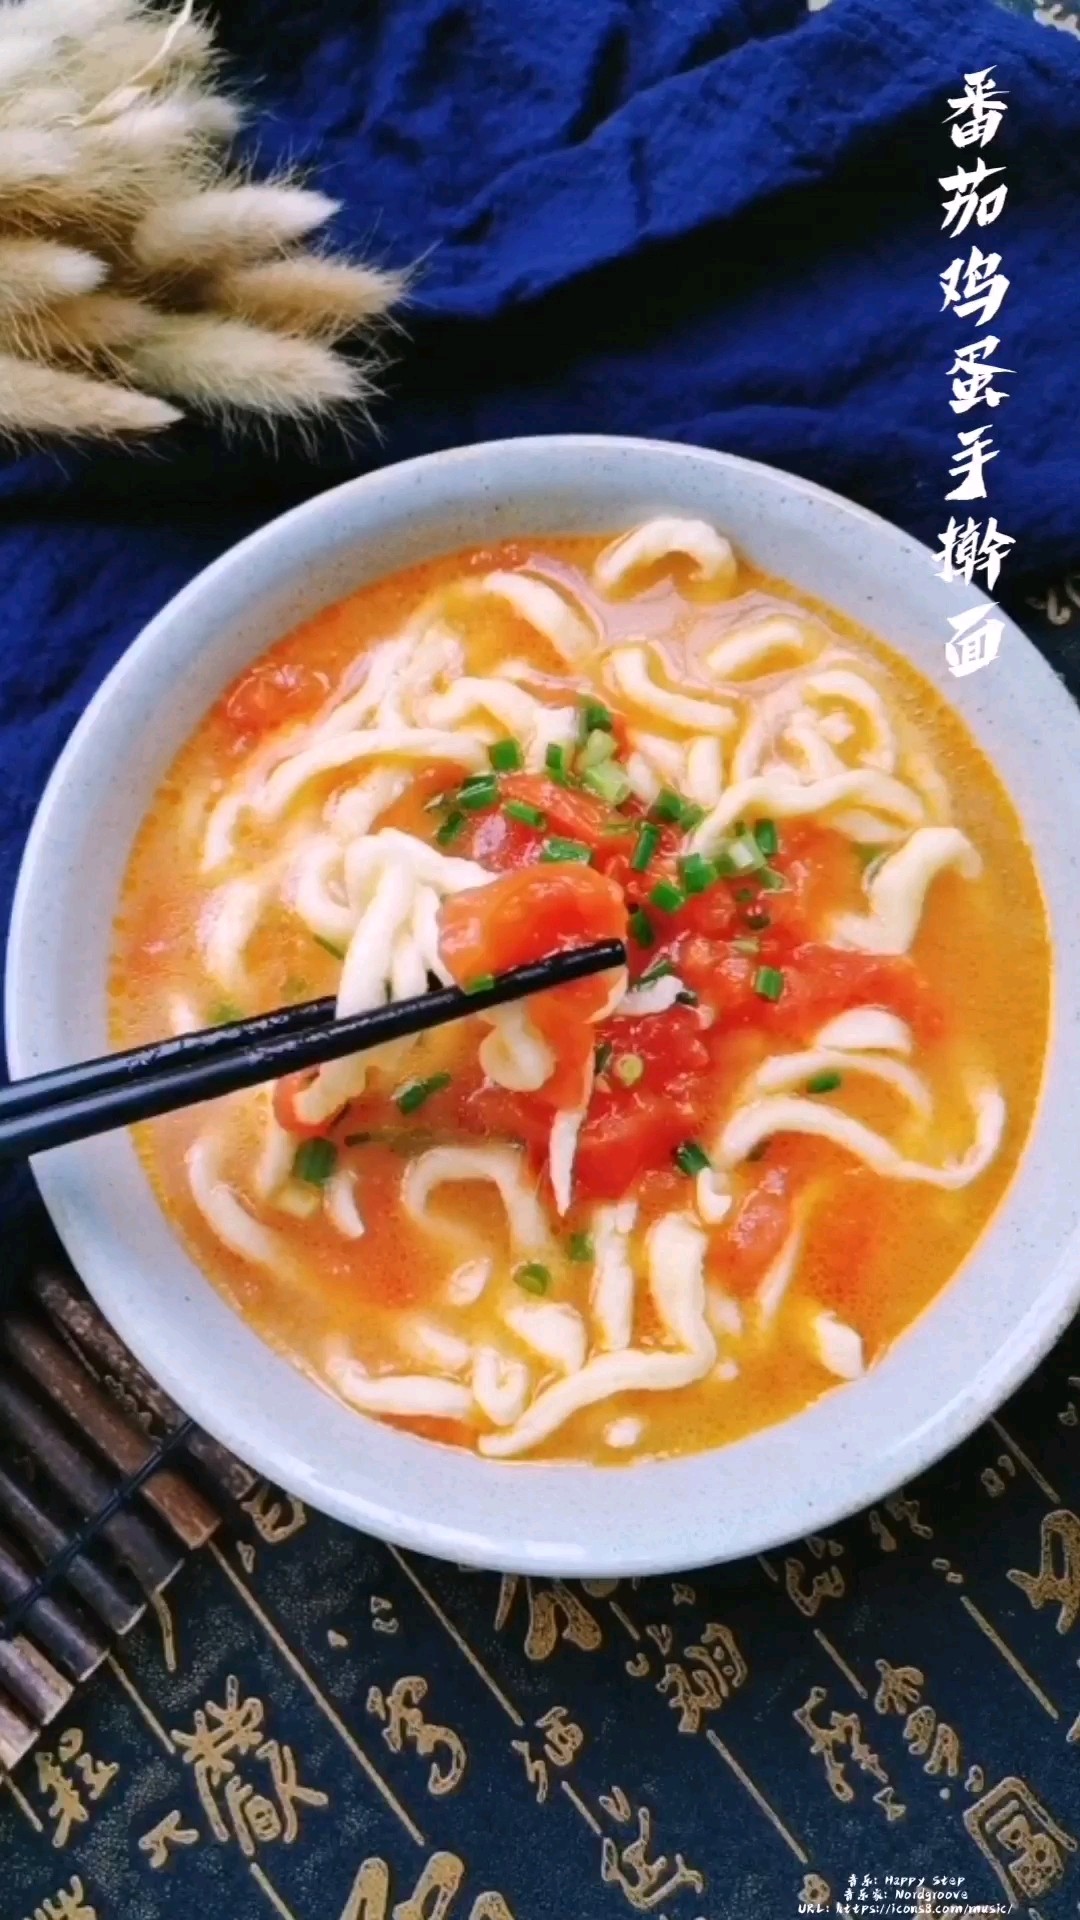 Hand-rolled Noodles with Tomato and Egg